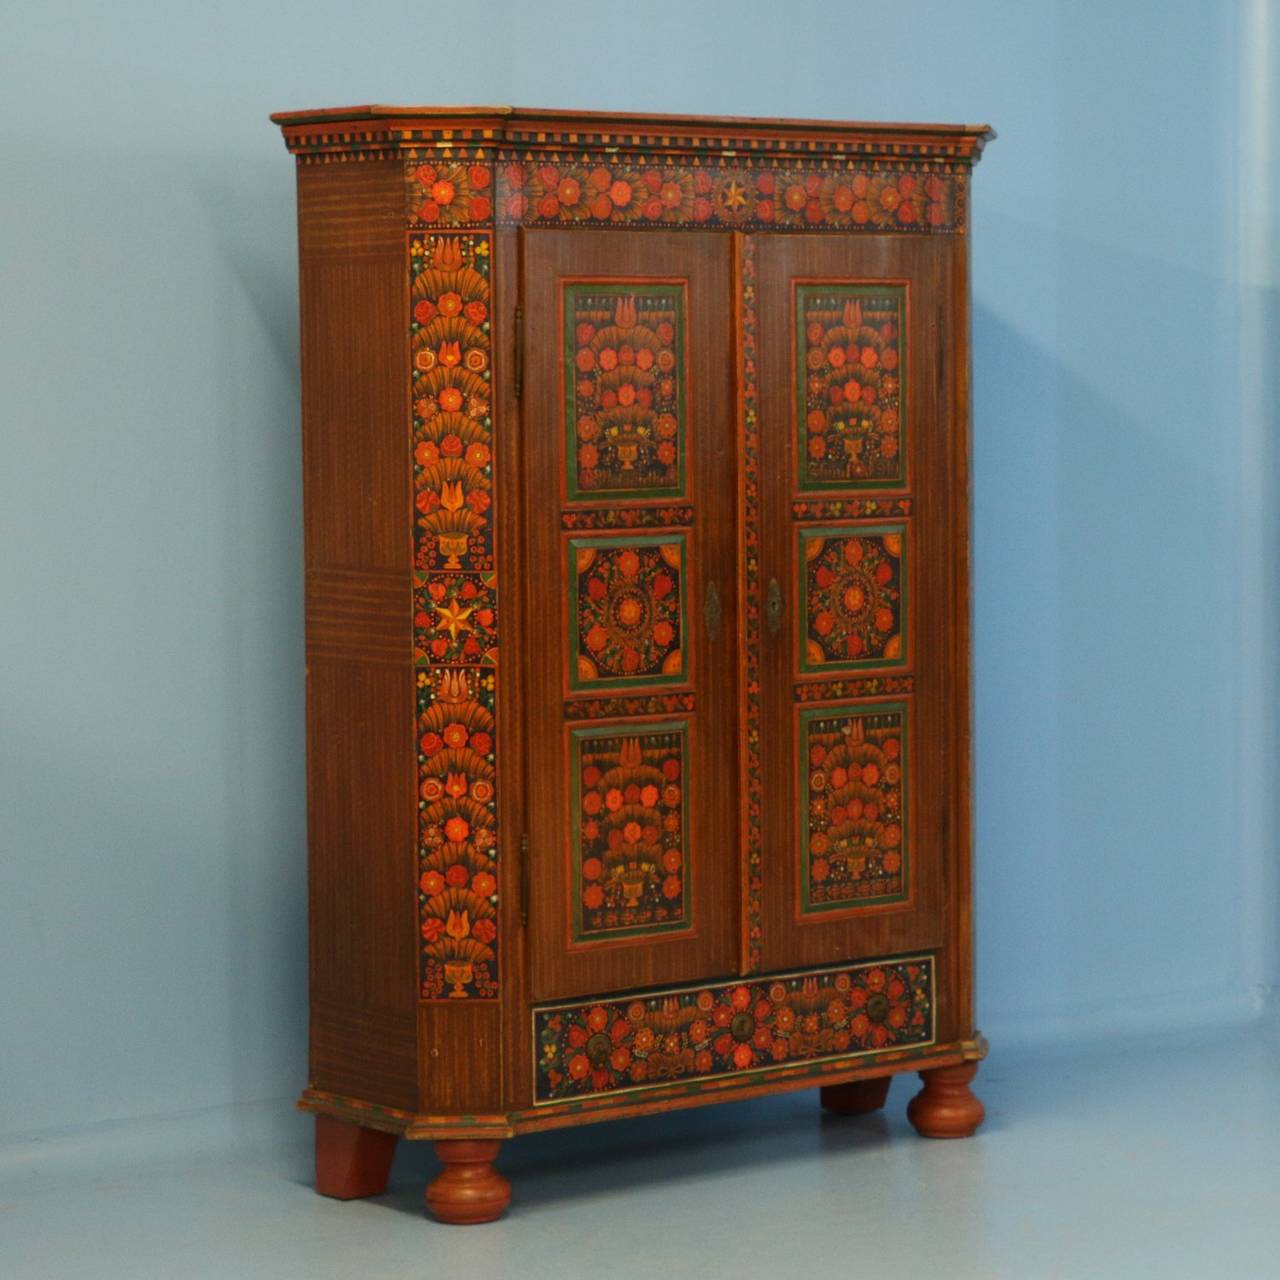 The remarkable paint is all original and extremely clear on this highly decorative armoire. The vibrant paint colors and floral design were traditional folk art style elements during the early 1900's in Hungary. This piece is in exceptional